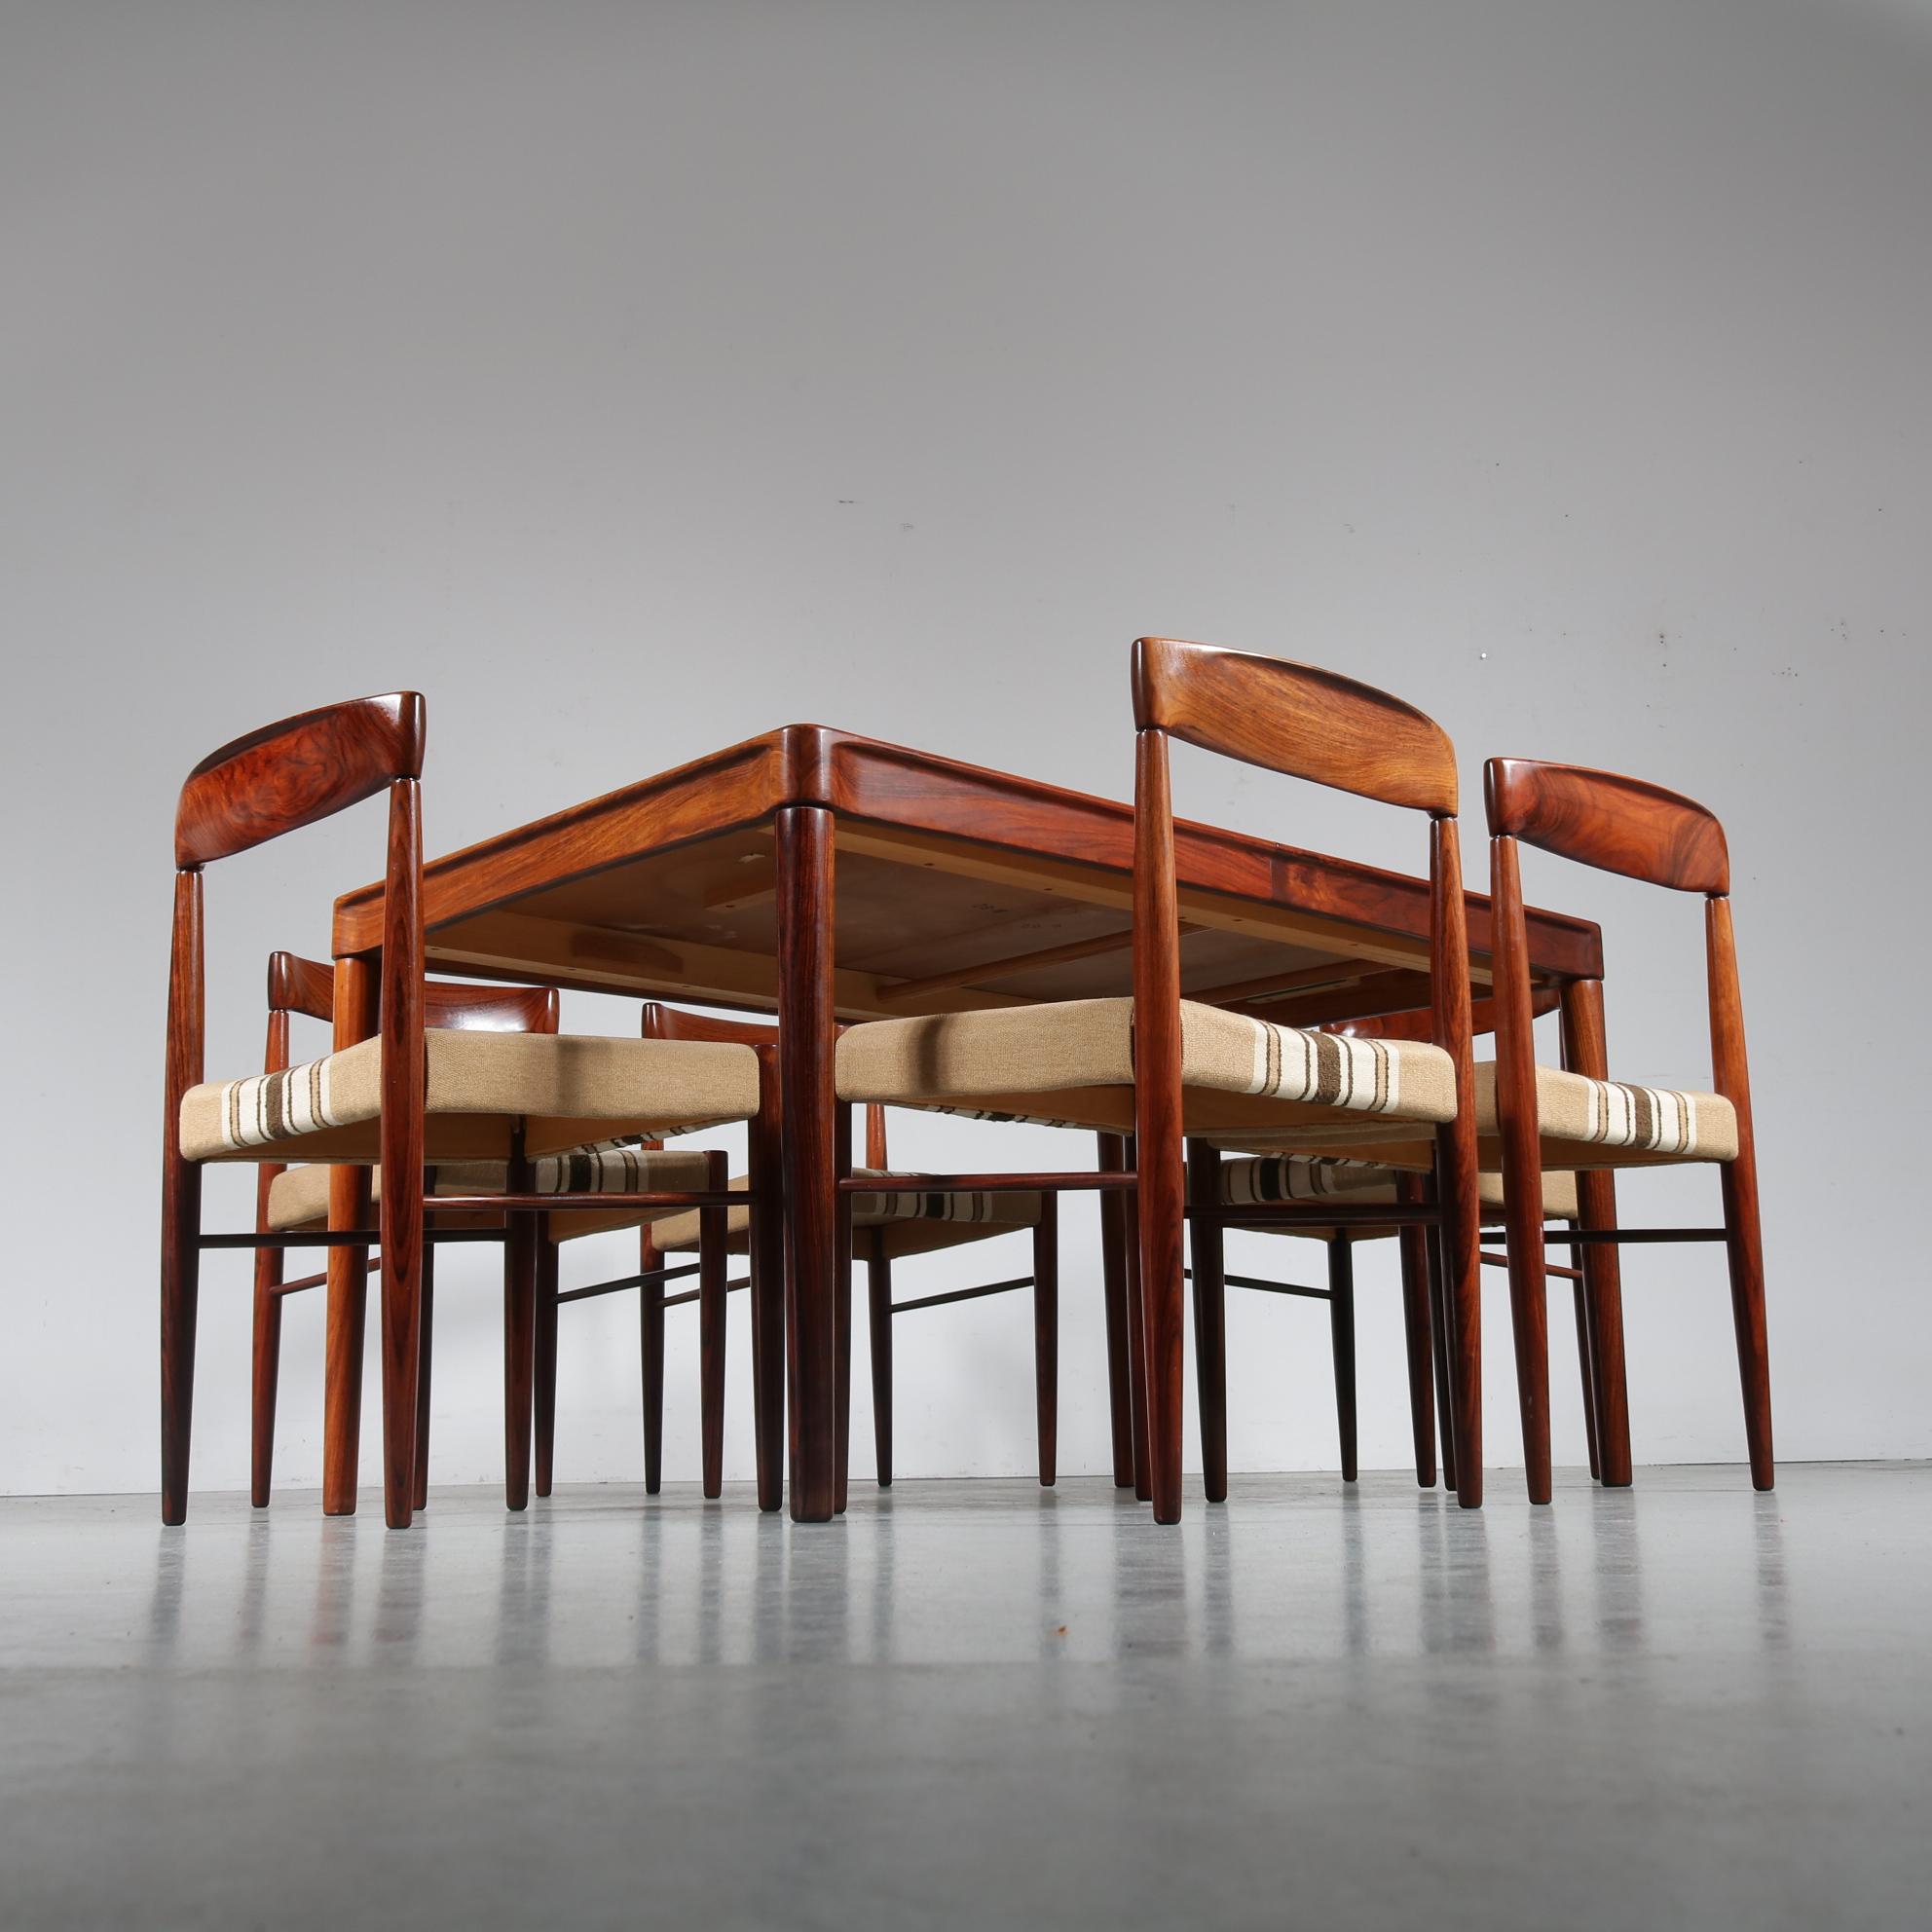 A beautiful dining room set designed by H.W. Klein, manufactured by Bramin in Denmark, circa 1960.

This luxurious set contains one extendible dining table and six dining chairs. The table is completely made of the highest quality tropical hardwood